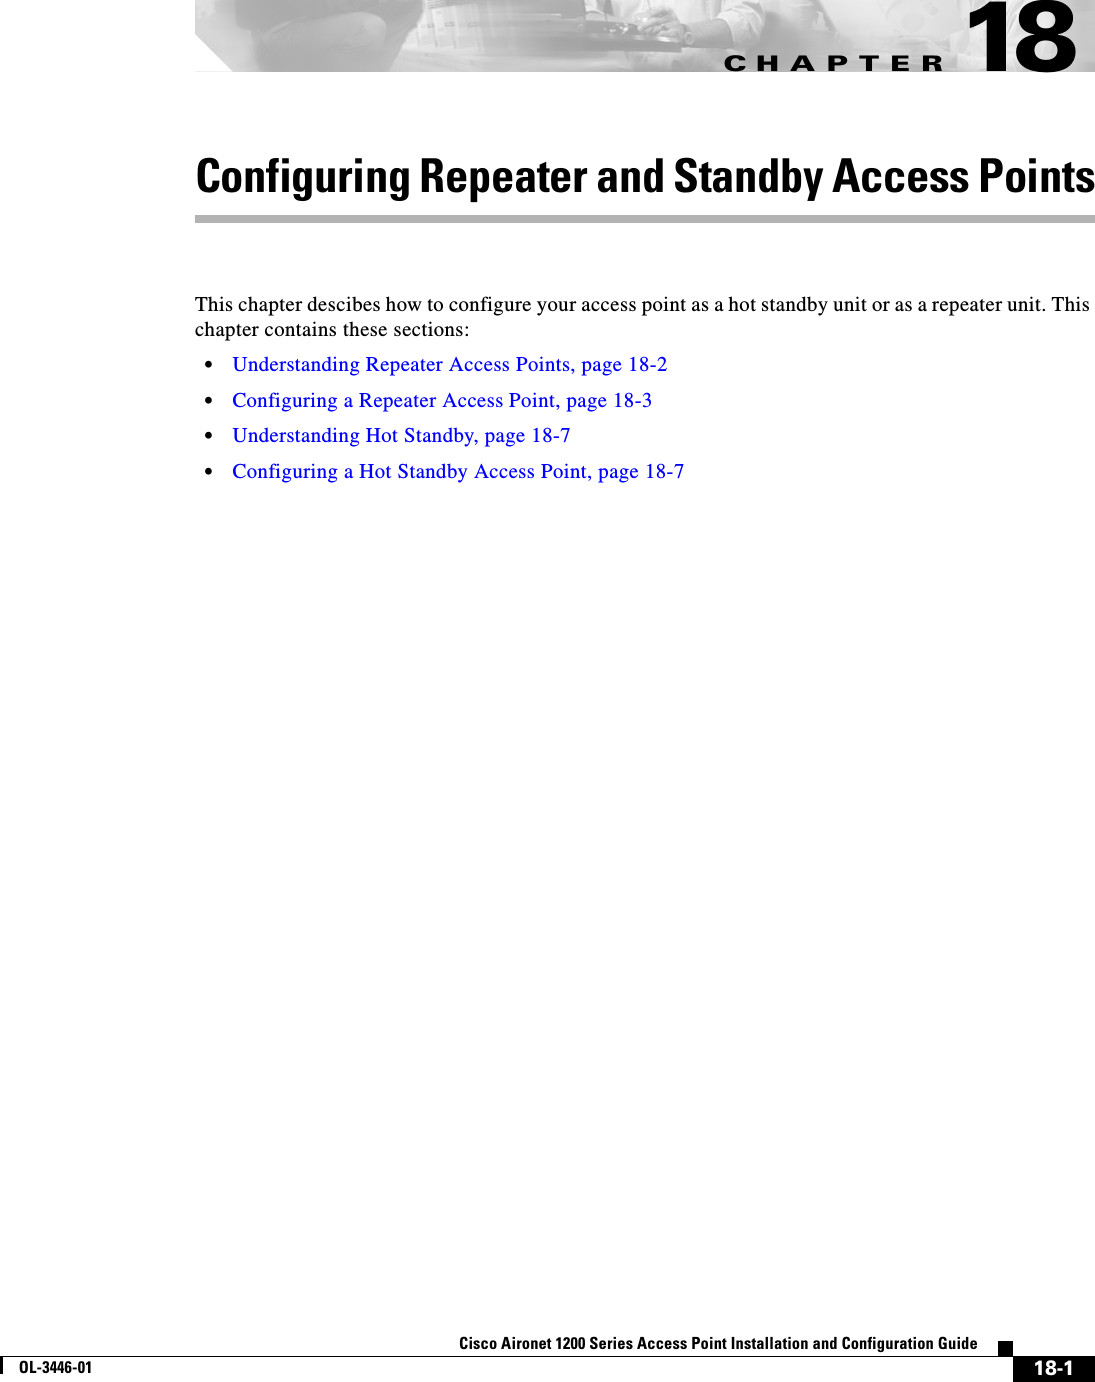 CHAPTER18-1Cisco Aironet 1200 Series Access Point Installation and Configuration GuideOL-3446-0118Configuring Repeater and Standby Access PointsThis chapter descibes how to configure your access point as a hot standby unit or as a repeater unit. This chapter contains these sections:•Understanding Repeater Access Points, page 18-2•Configuring a Repeater Access Point, page 18-3•Understanding Hot Standby, page 18-7•Configuring a Hot Standby Access Point, page 18-7